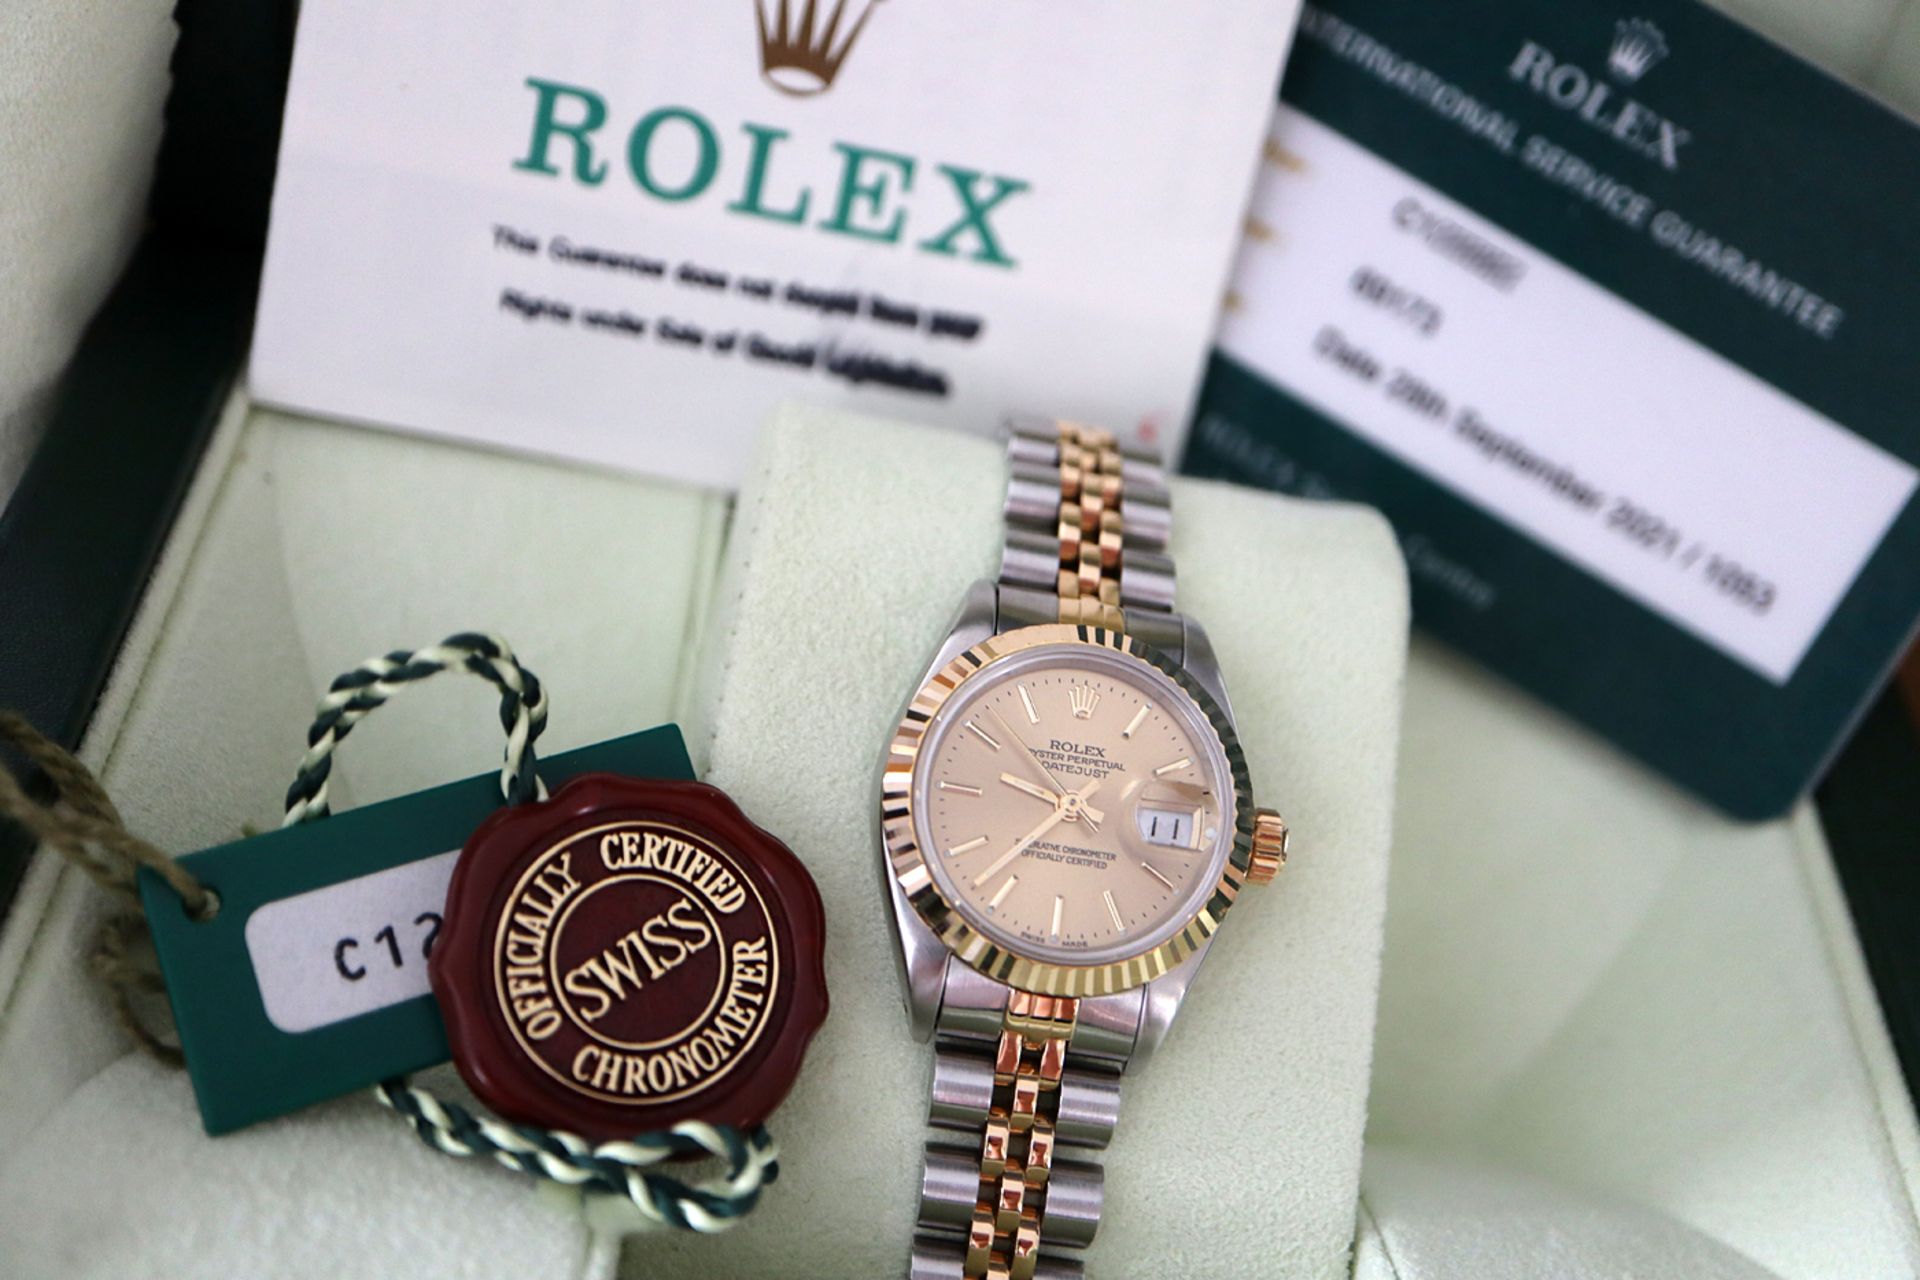 ROLEX DATEJUST 18K / STEEL REF. 69173 *CHAMPAGNE* - FULL SET WITH CERTIFICATE, BOX & TAGS ETC - Image 6 of 9